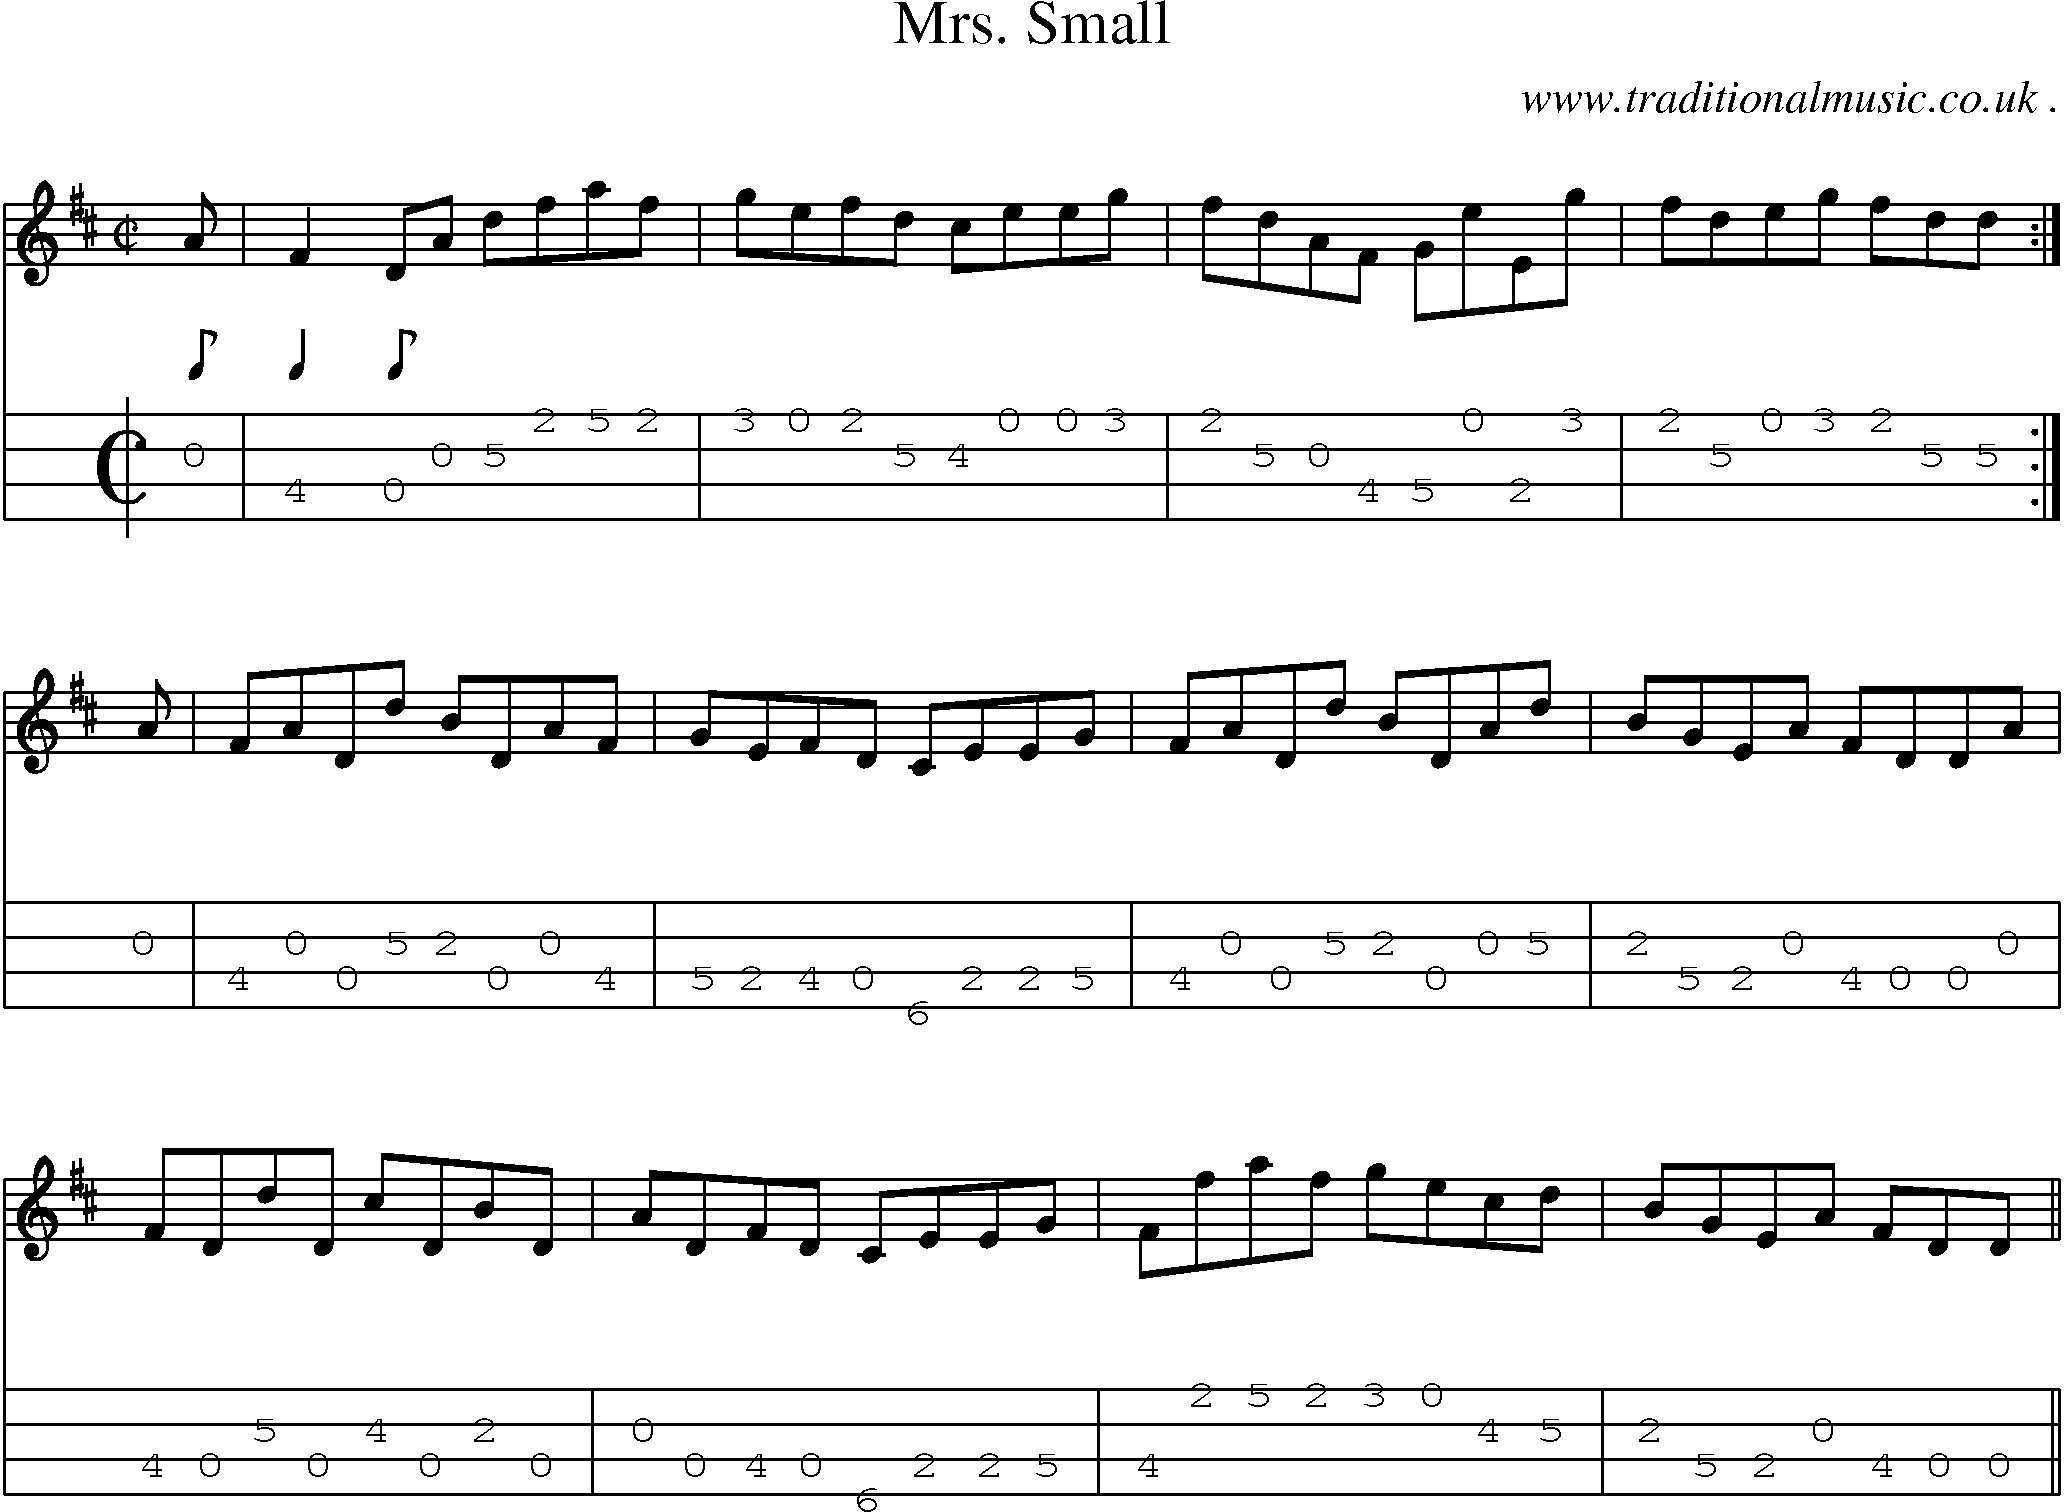 Sheet-music  score, Chords and Mandolin Tabs for Mrs Small